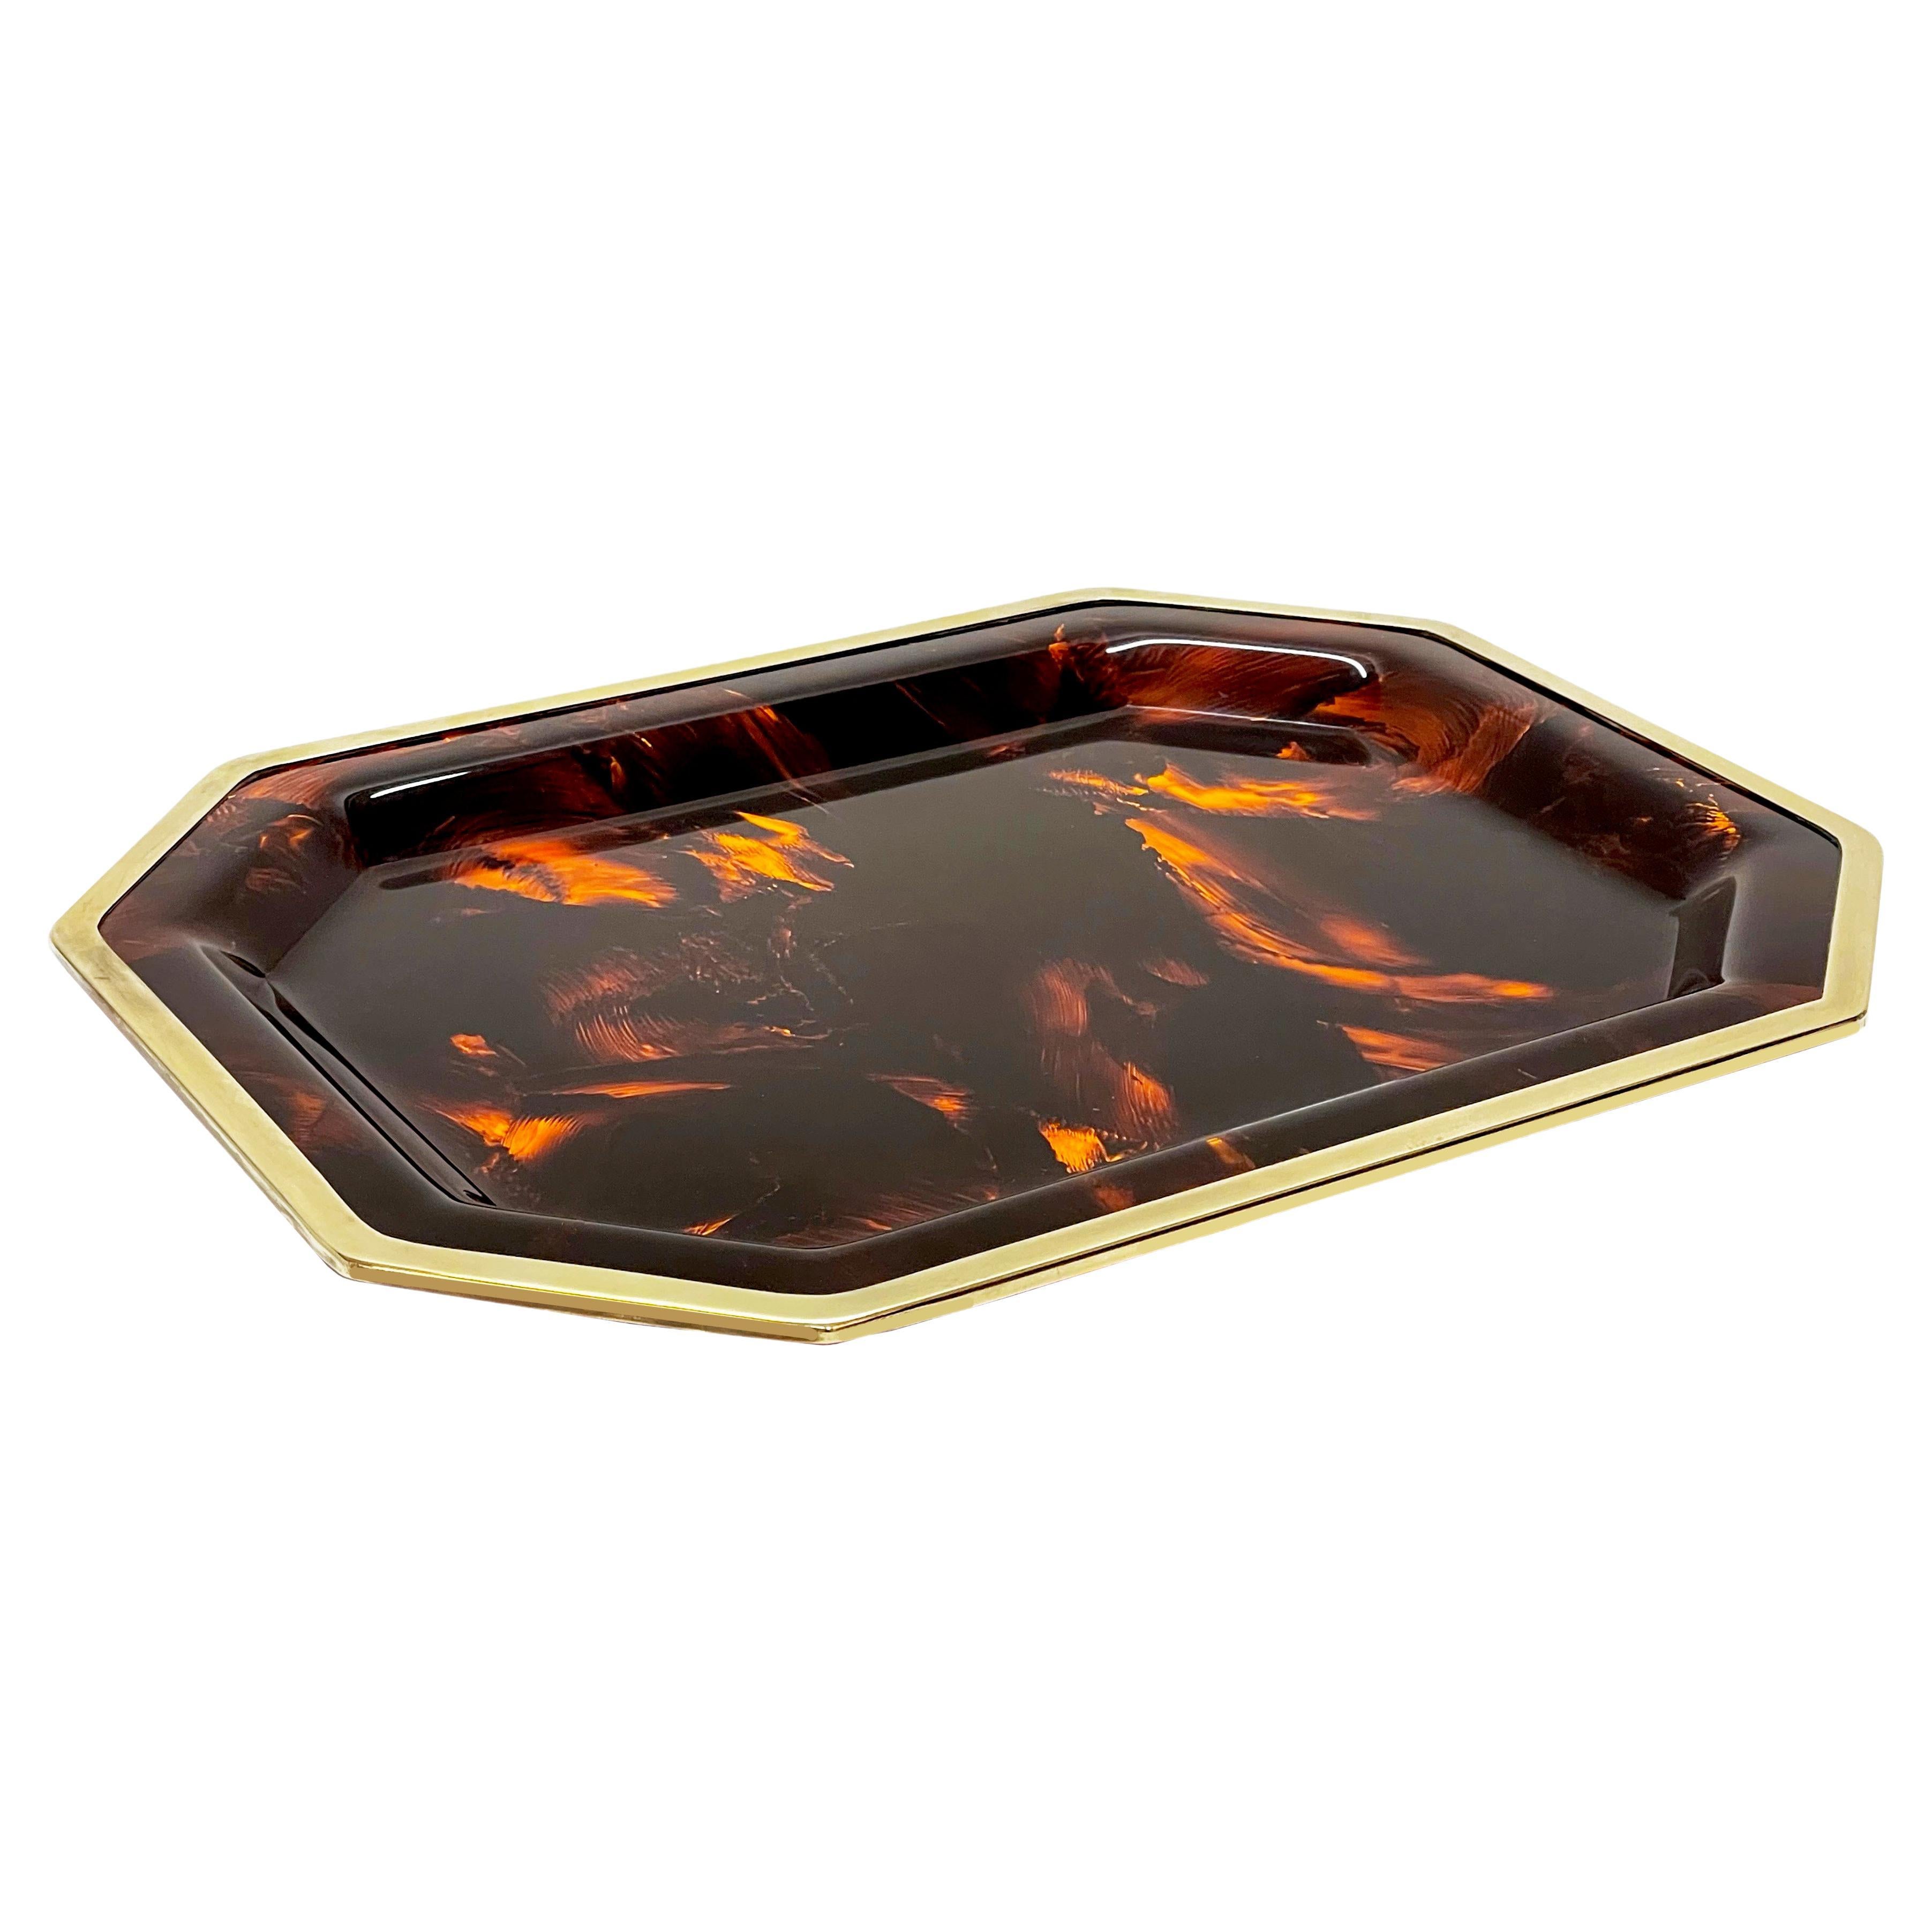 Willy Rizzo Midcentury Lucite and Brass Serving Tray for Christian Dior, 1970s